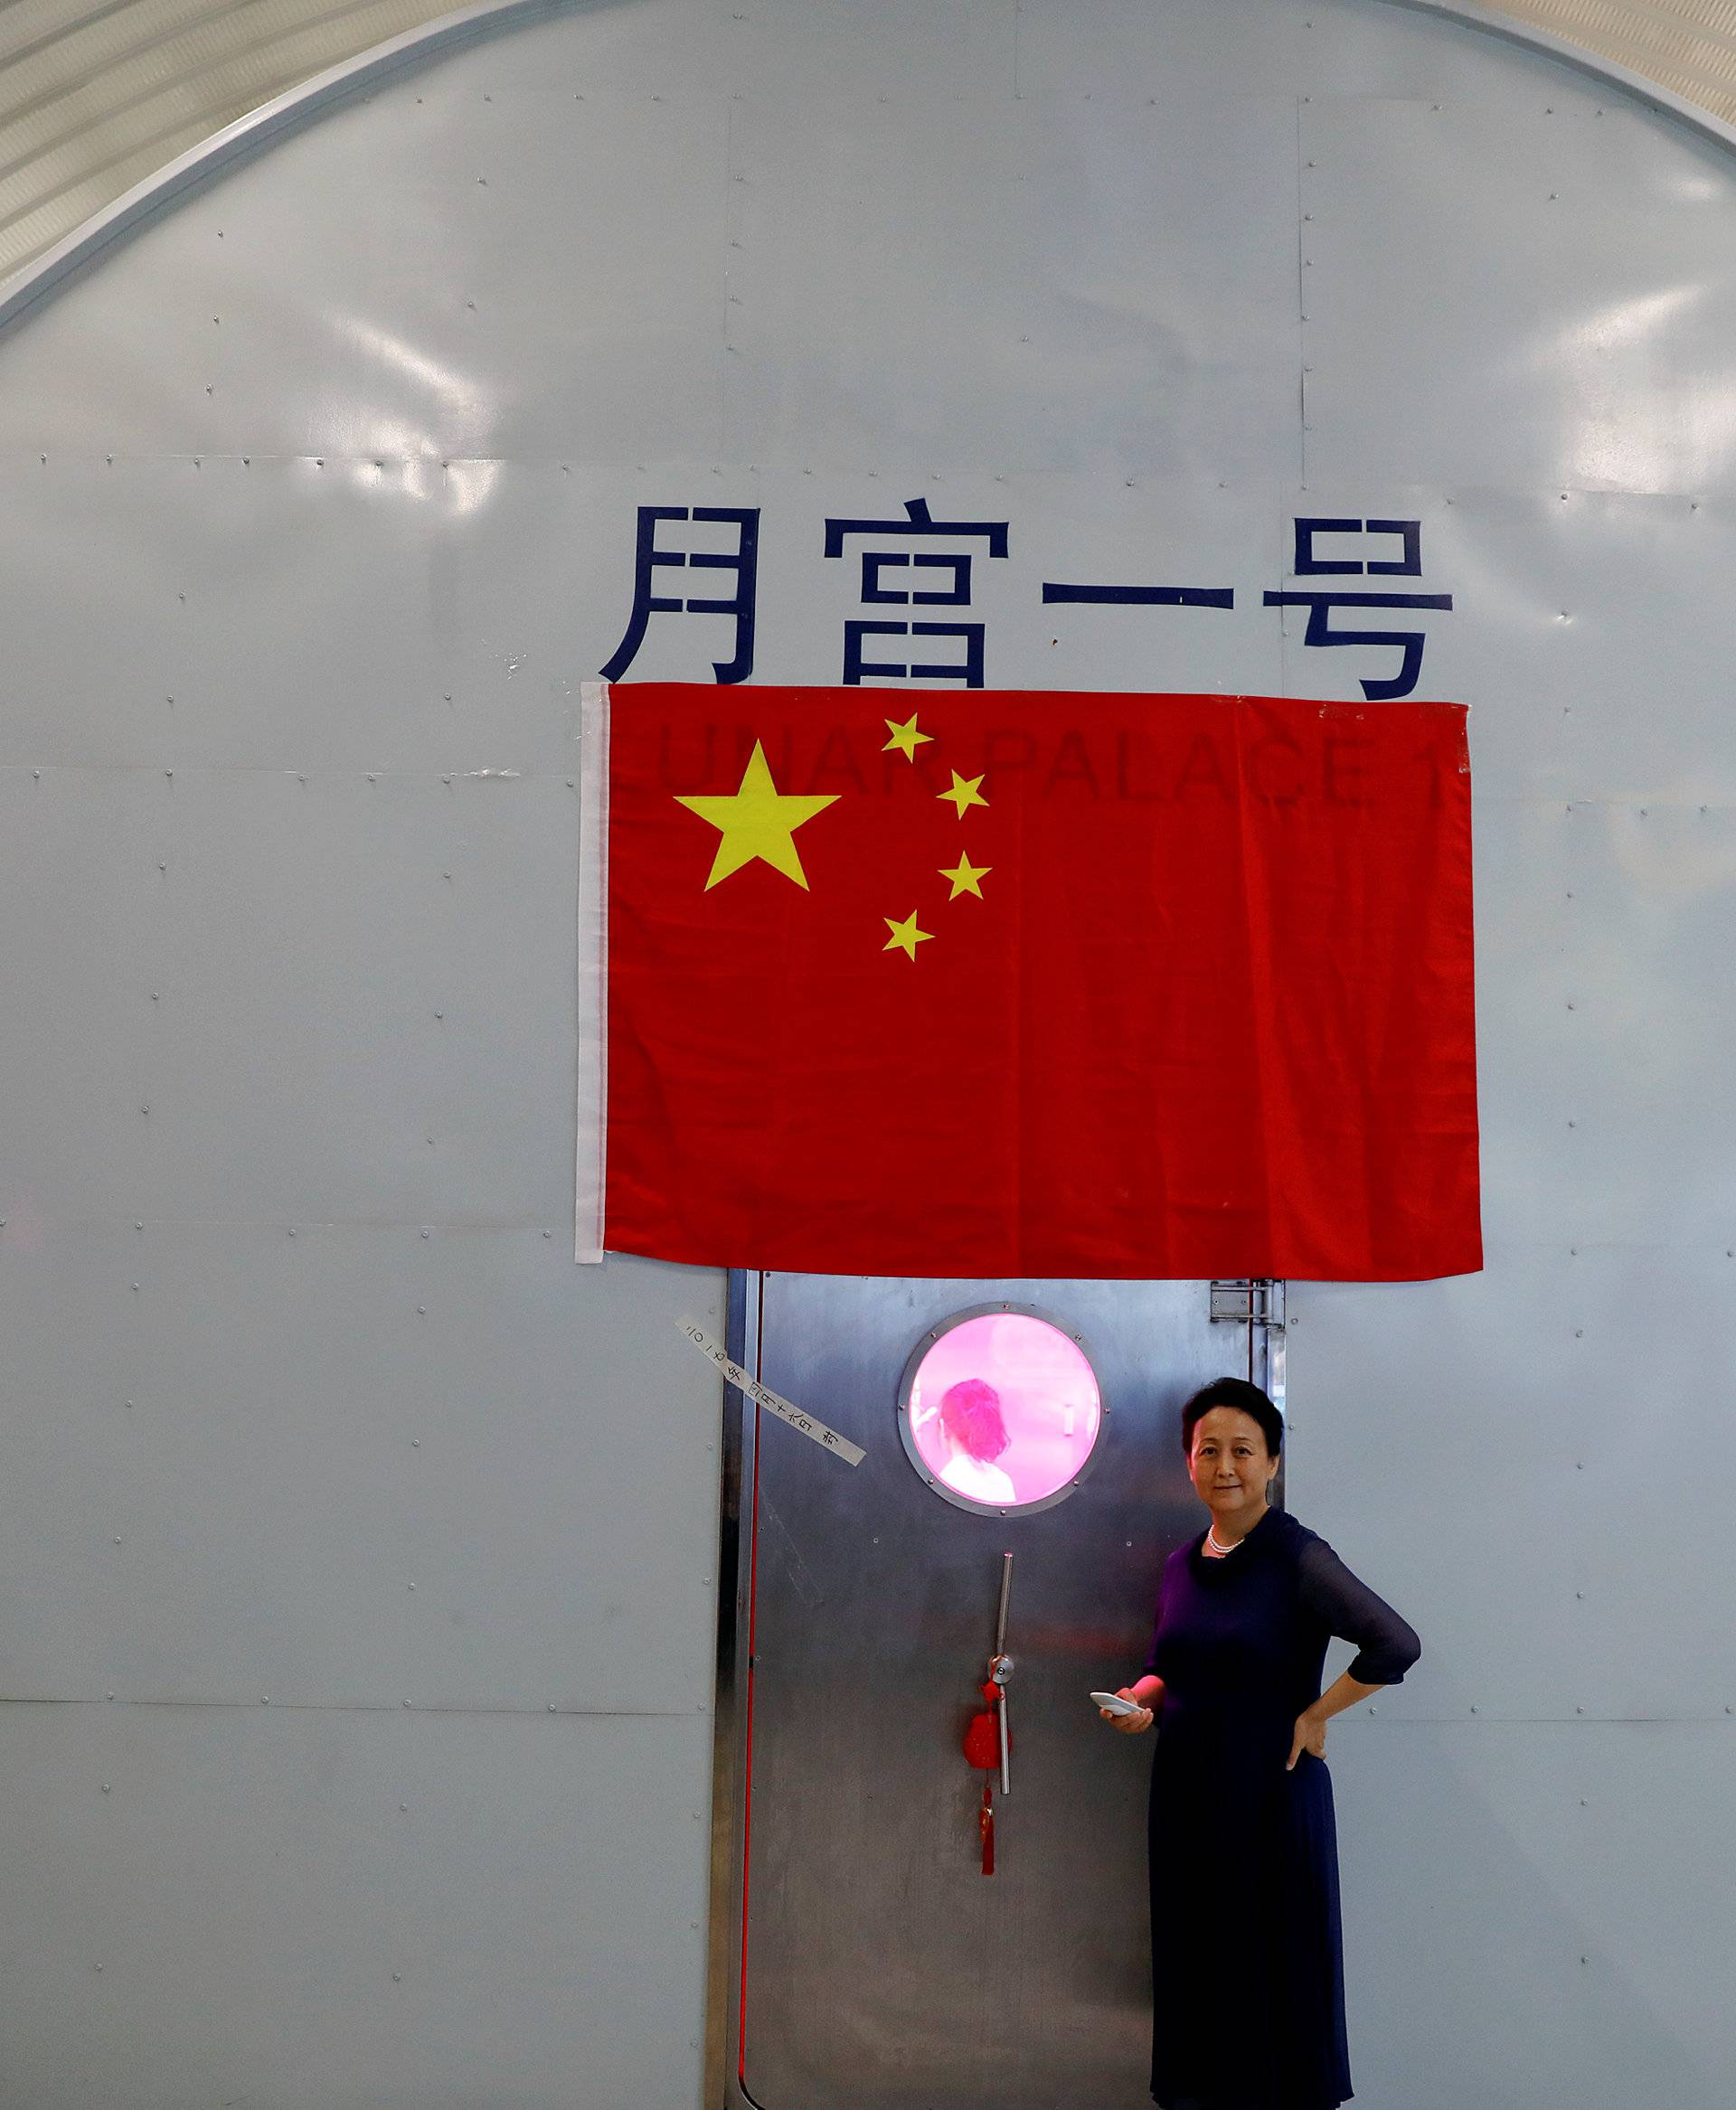 Liu Hong, chief designer of the Lunar Palace 365 Project stands outside a simulated space cabin in which volunteers temporarily live as a part of the project at Beihang University in Beijing